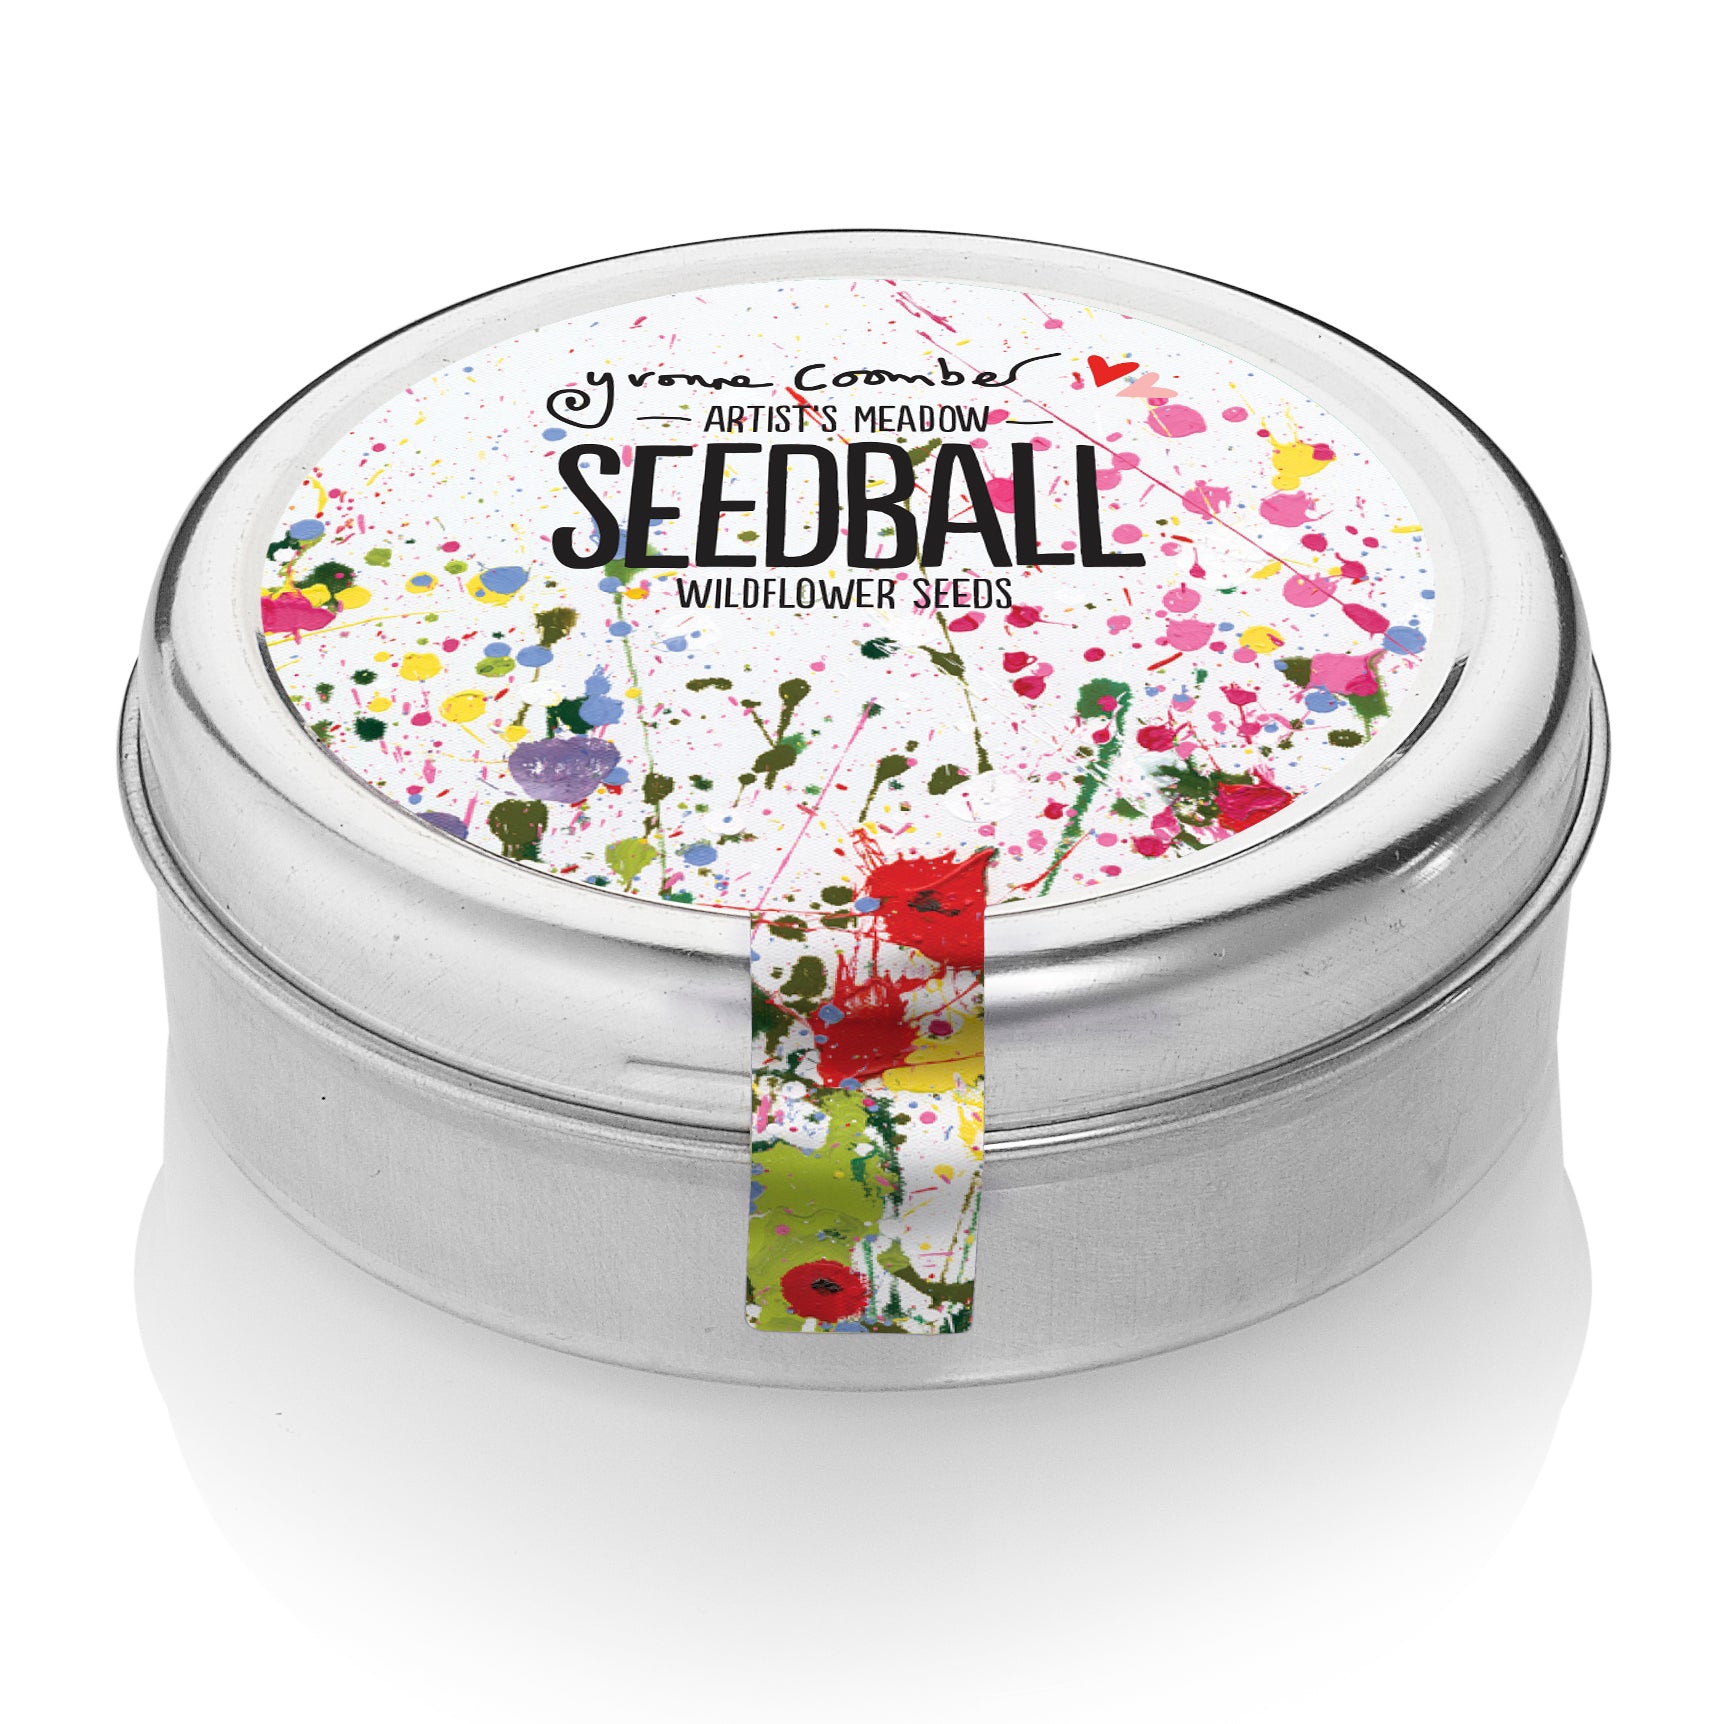 yvonne coomber artist meadow seedball wildflower seeds close up available from beevive